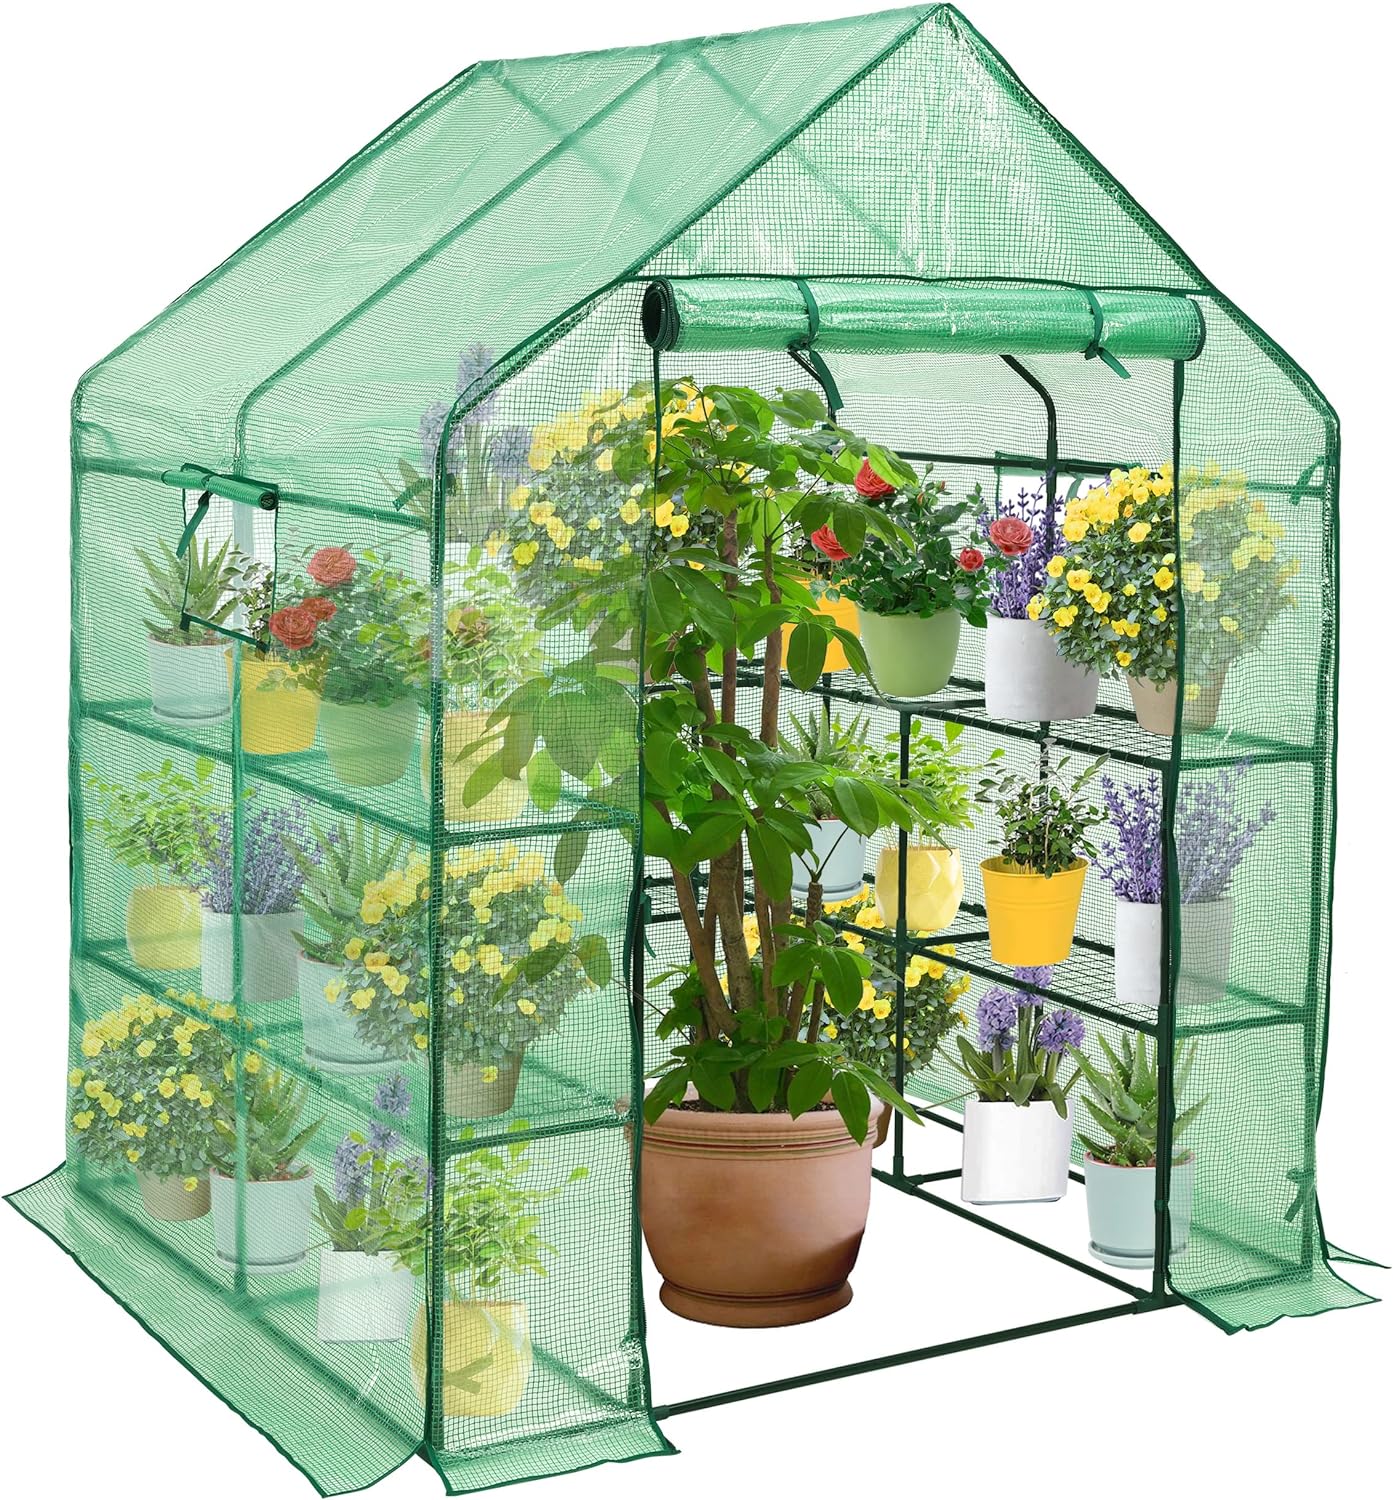 57"x57"x77" Walk-in Greenhouse with Shelves for Outdoor Garden Customizable